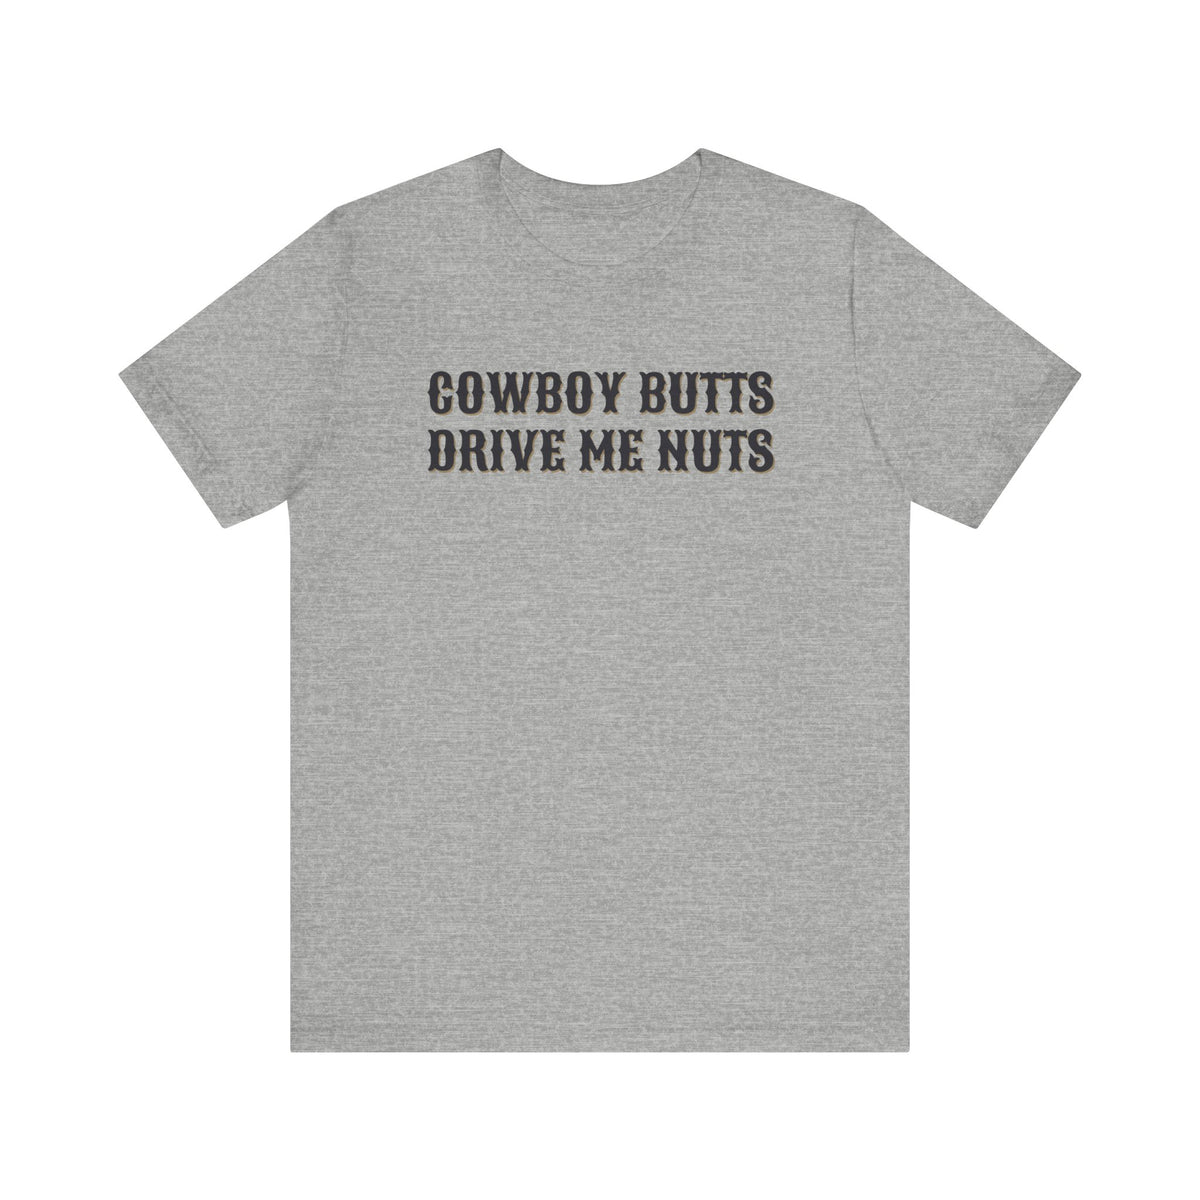 Cowboy Butts Drive Me Nuts Tee | Women's Western Graphic T-shirt | Country Graphic Tees